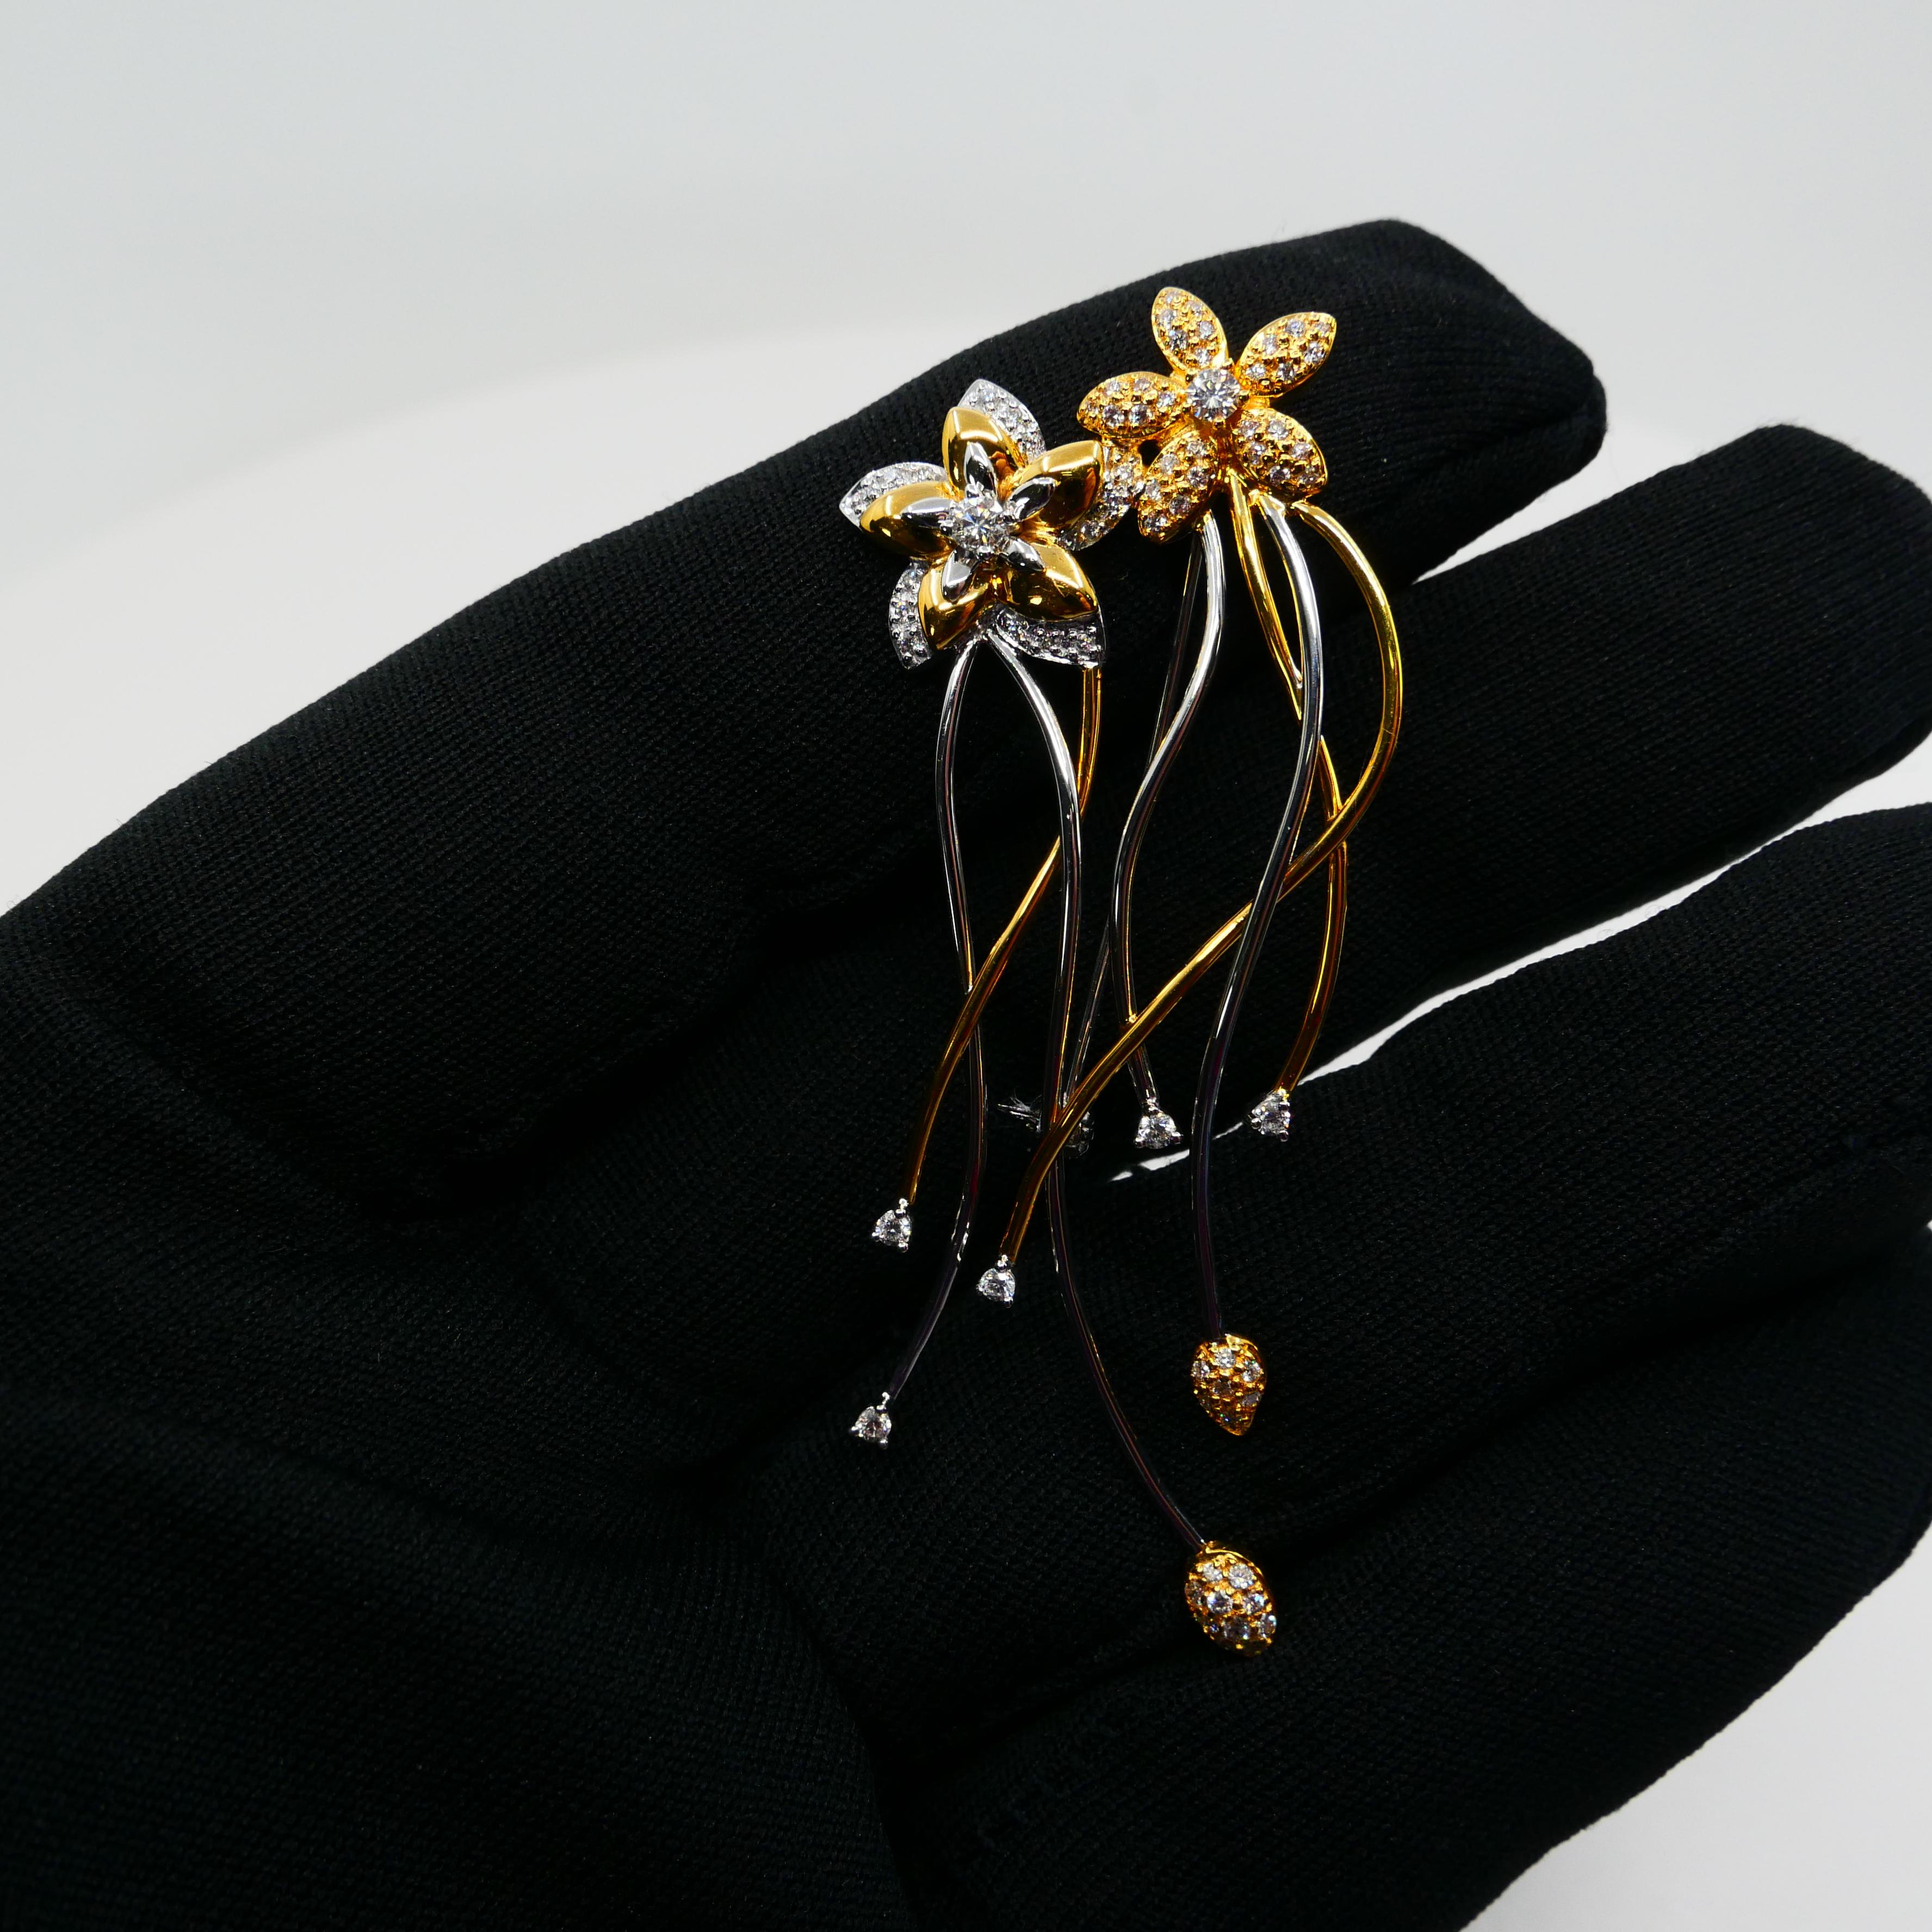 Round Cut 18K Two Tone White & Yellow Gold, Diamond Flower Brooch, Beautiful Workmanship For Sale